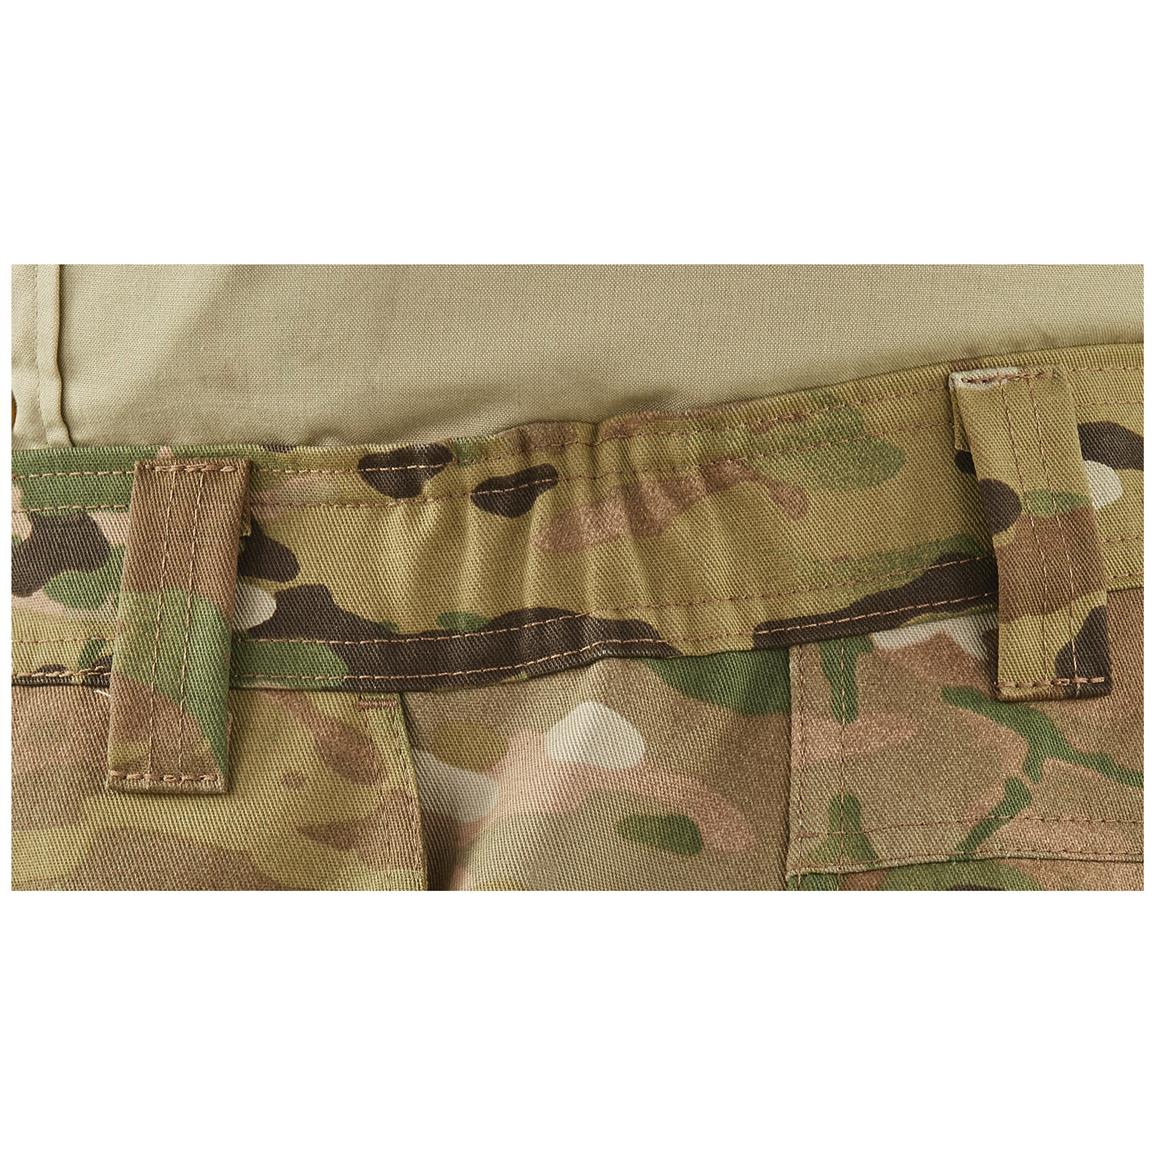 HQ ISSUE Men's Military-Style MultiCam BDU Cargo Pants - 641411, Tactical Clothing at Sportsman